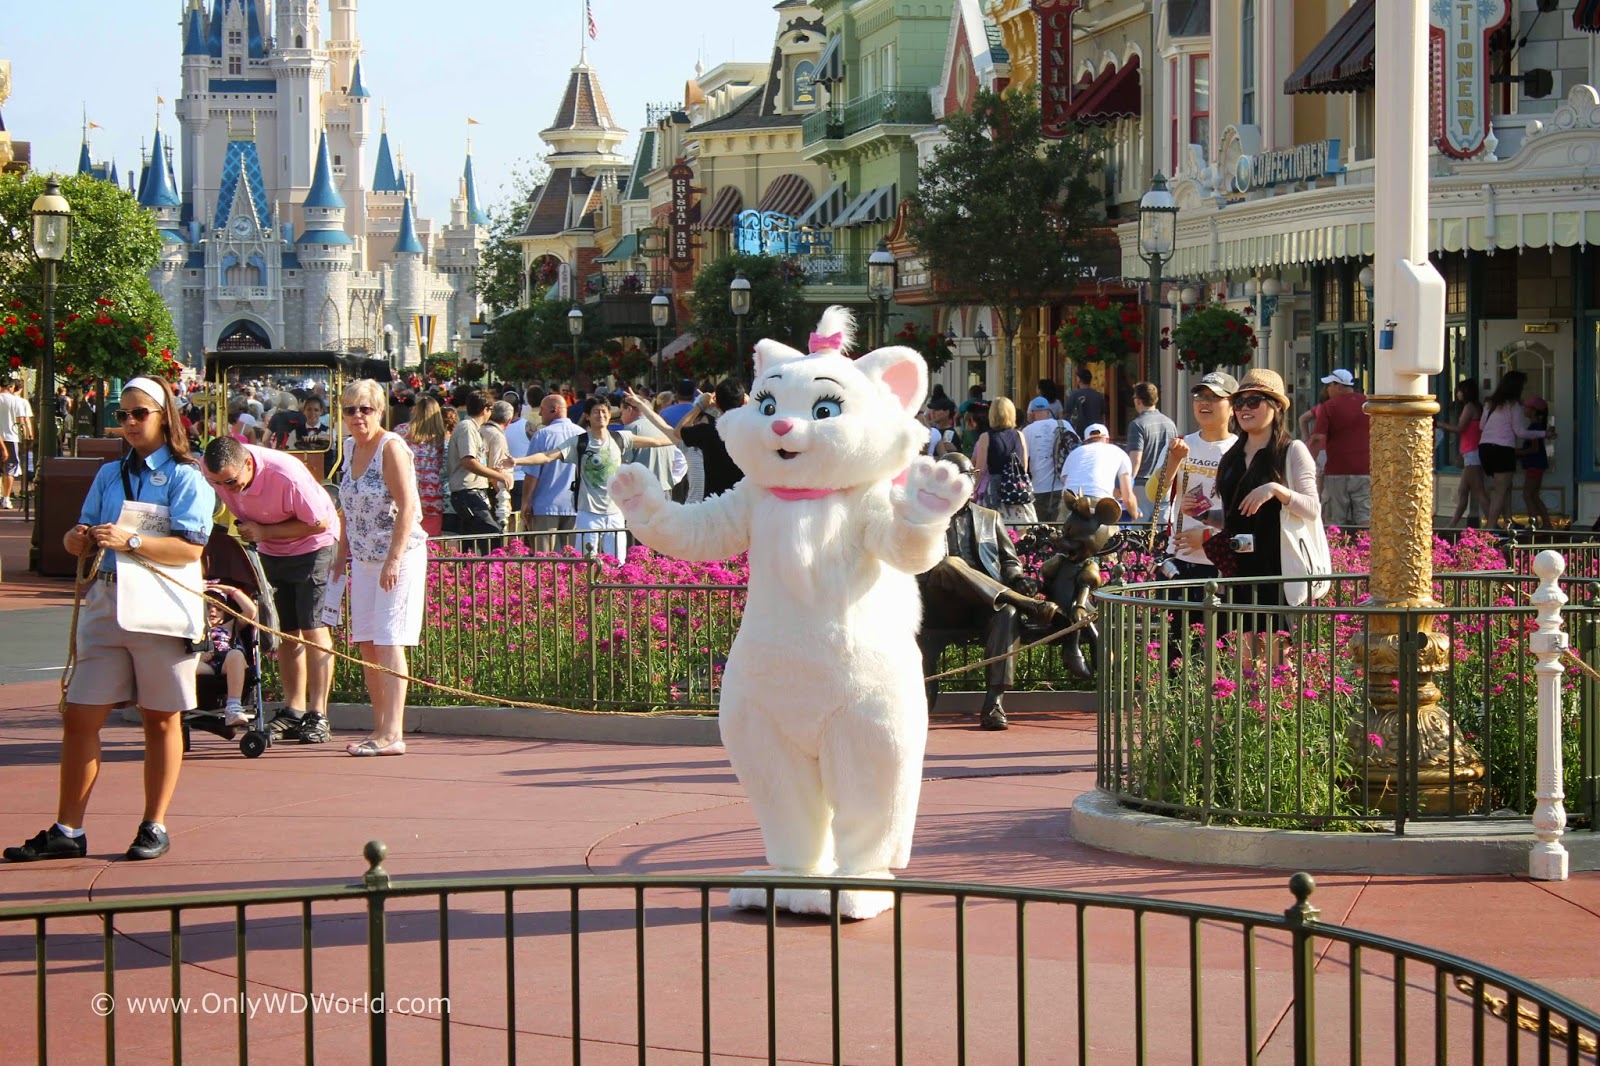 18 Disney World Character Greetings That Don't Cost Extra